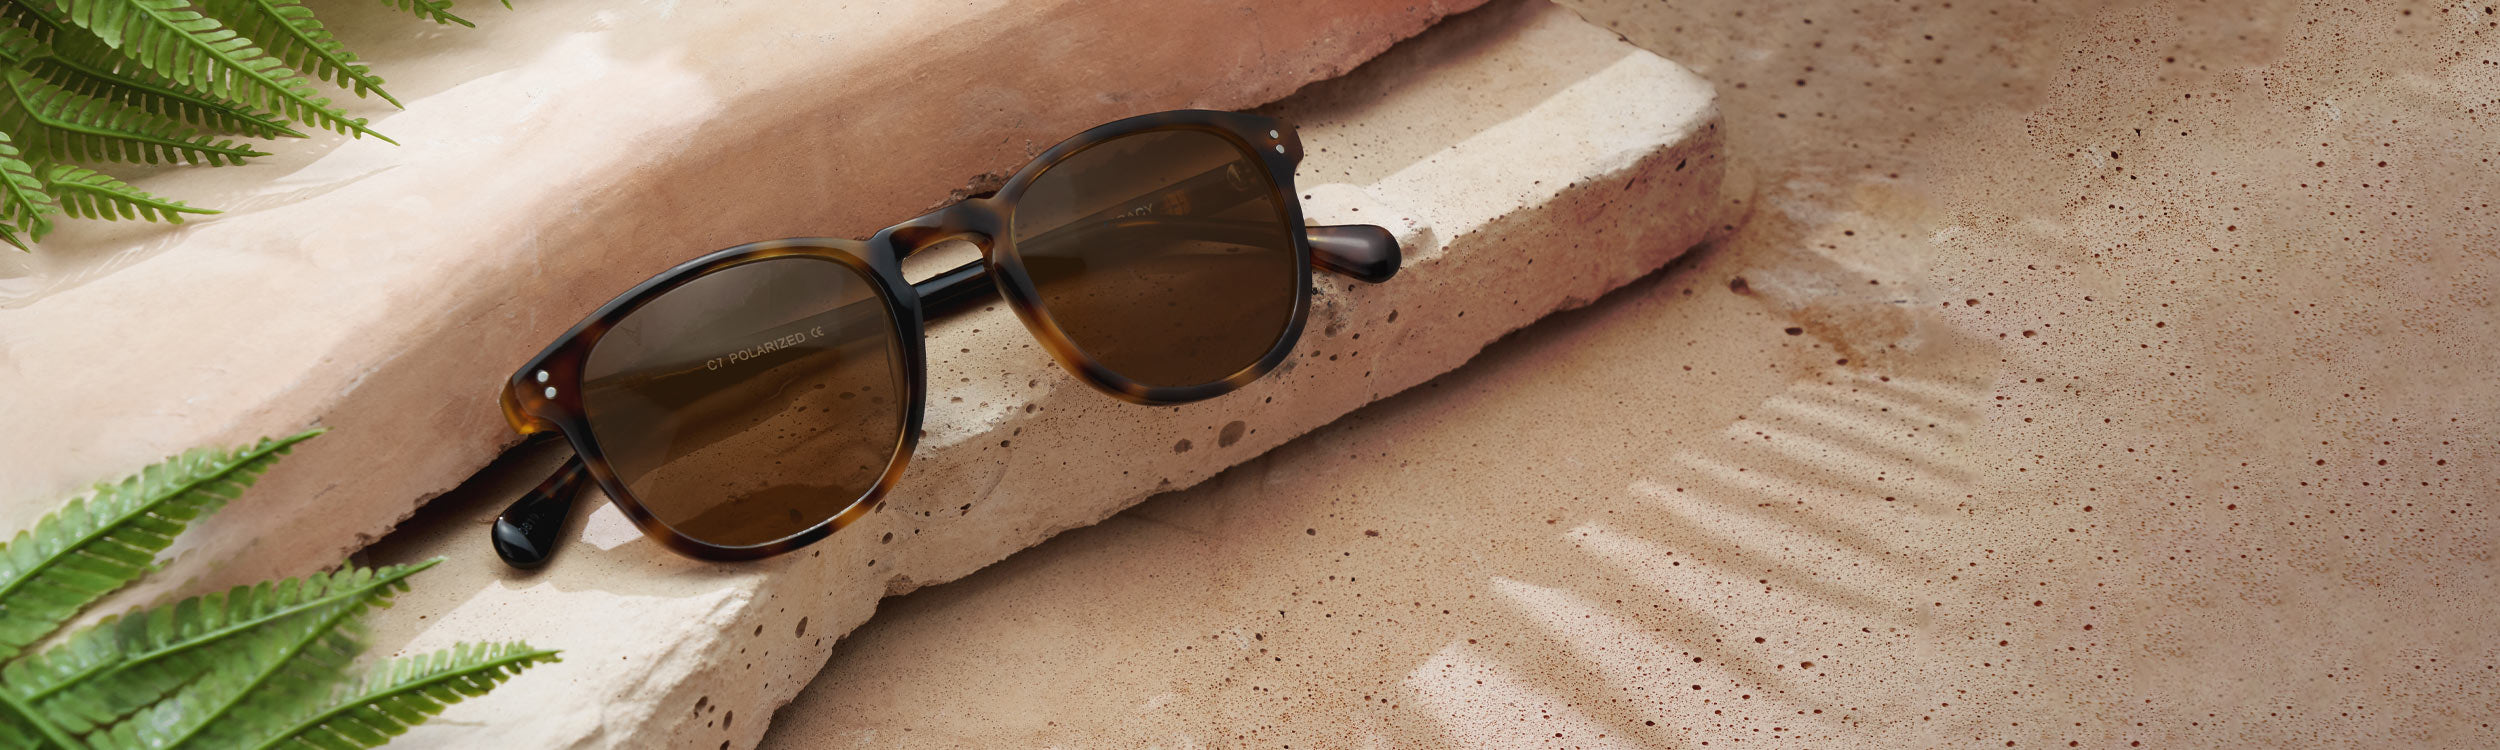 Cedar tortoise colored sunglasses resting on textured rock with leaves on corners